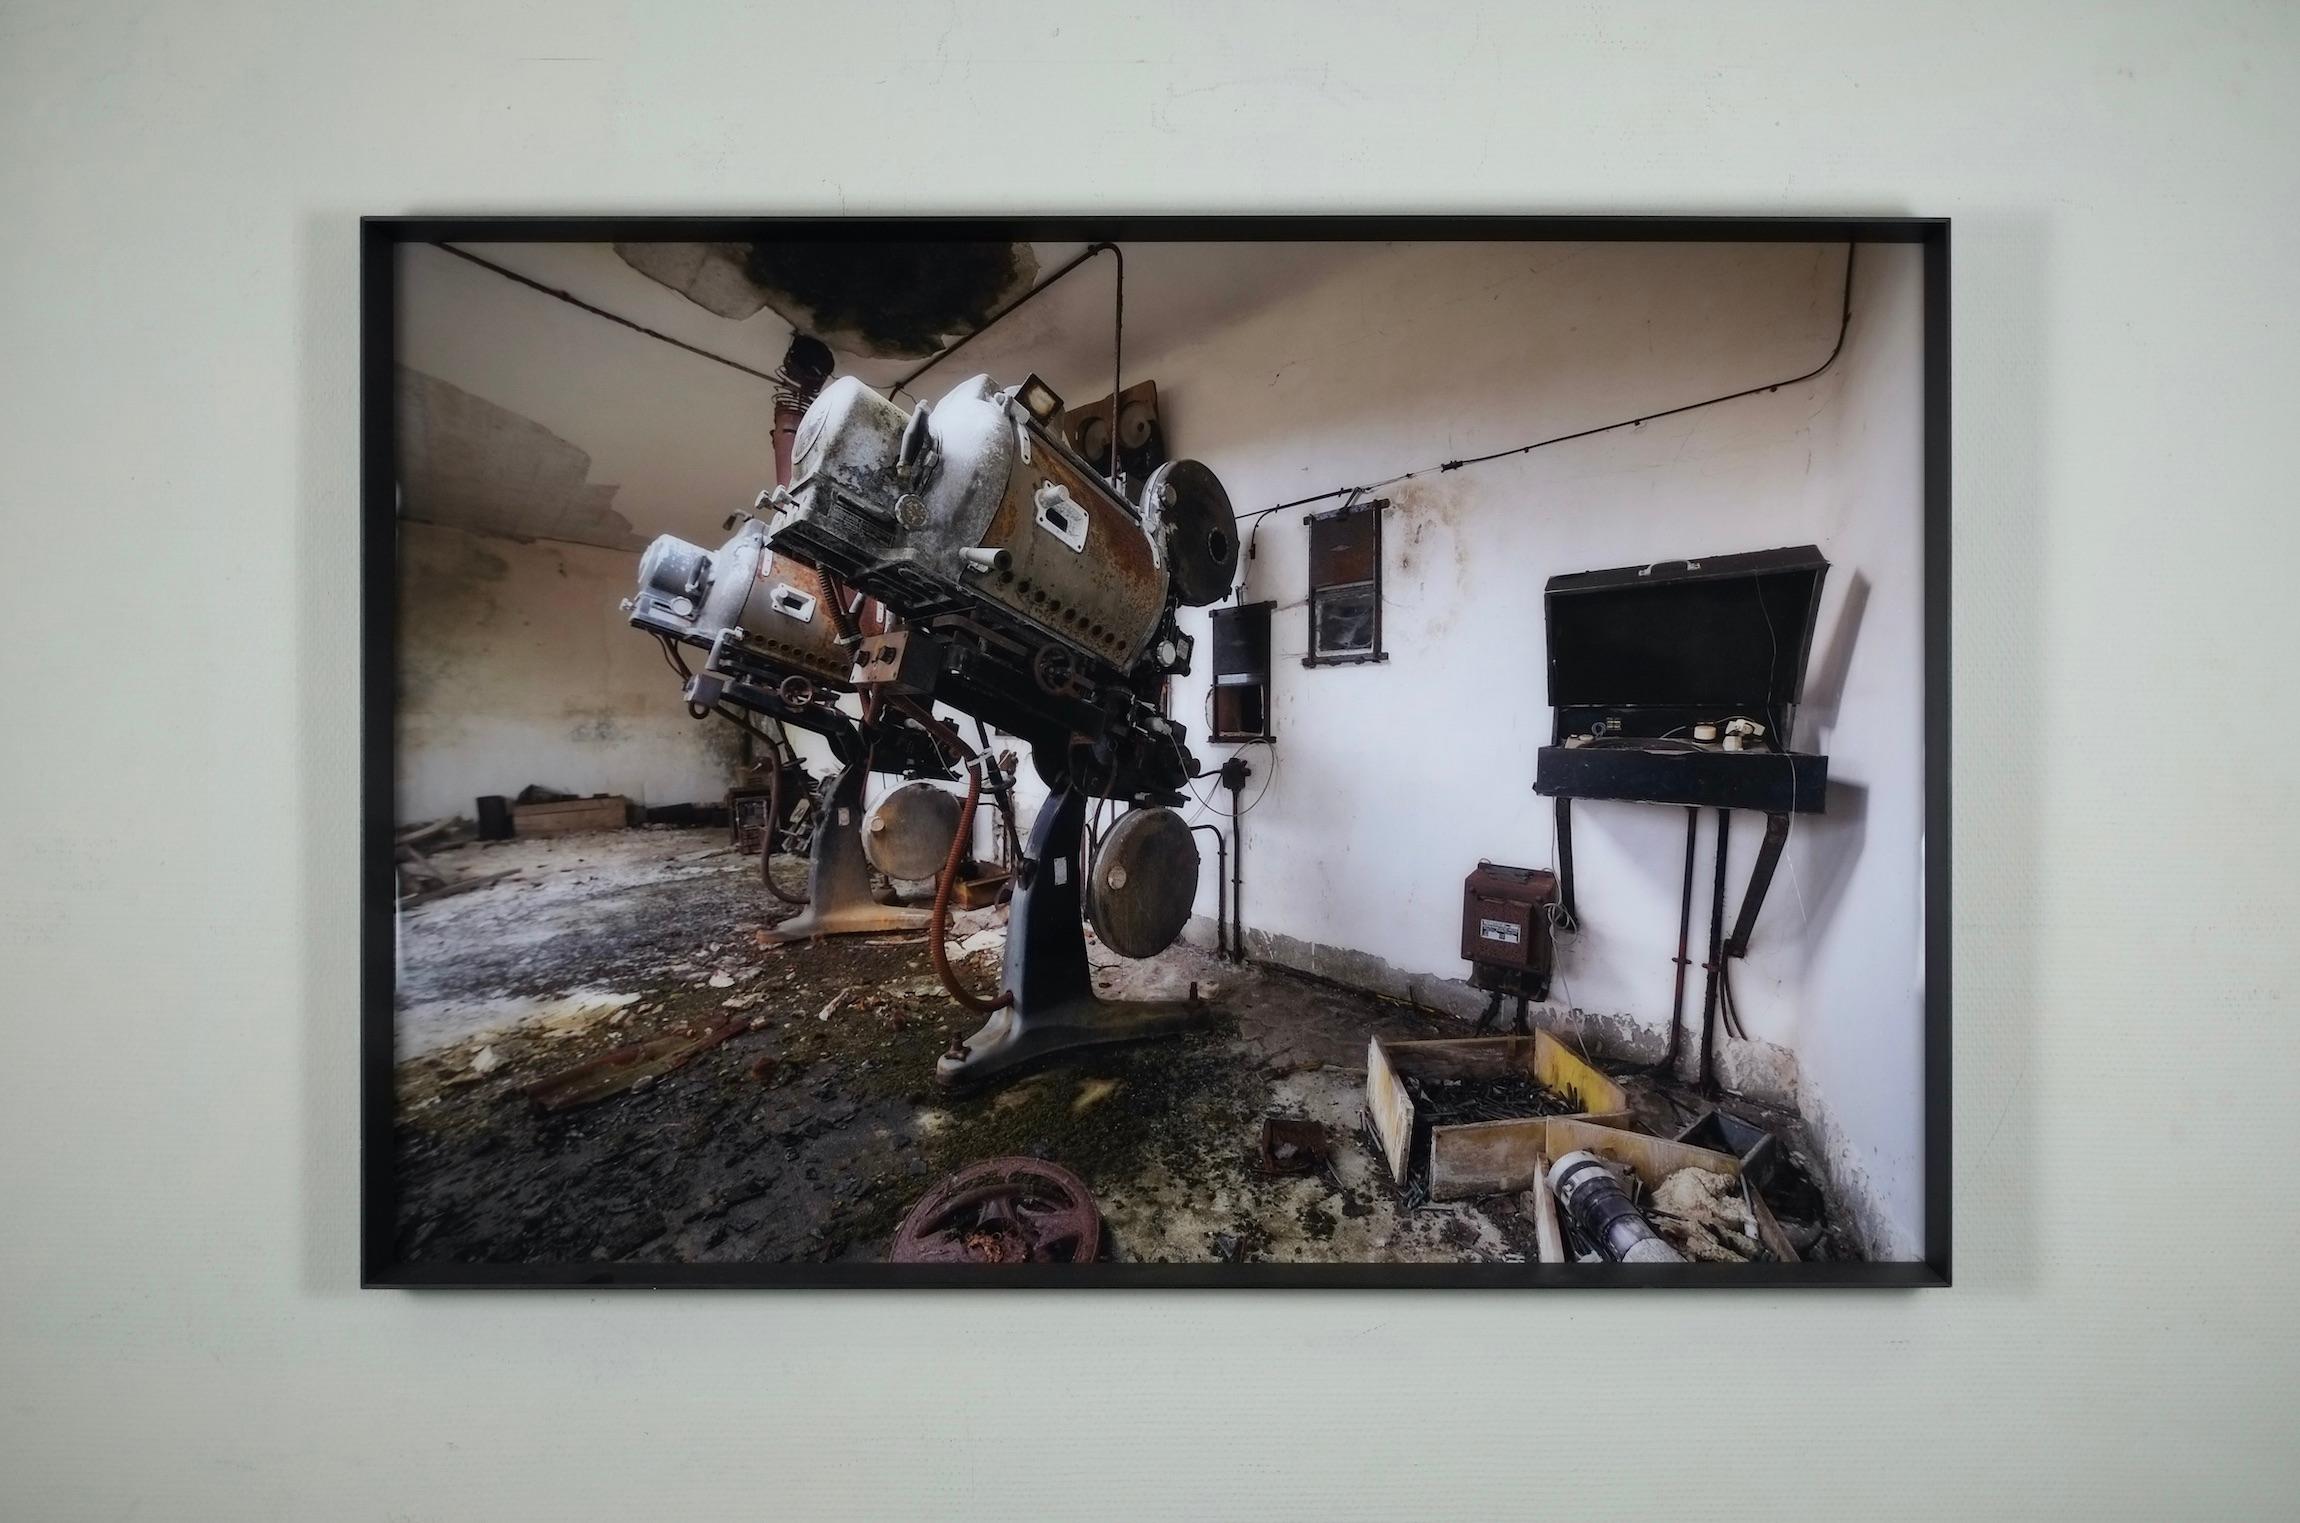 Print mounted on aluminium with plexiglas, framed. Edition of 15.


Dimitri Bourriau is a French photographer, he has always been interested in history and architectural remains. He explores the ruins of the past and observes the decline of time on